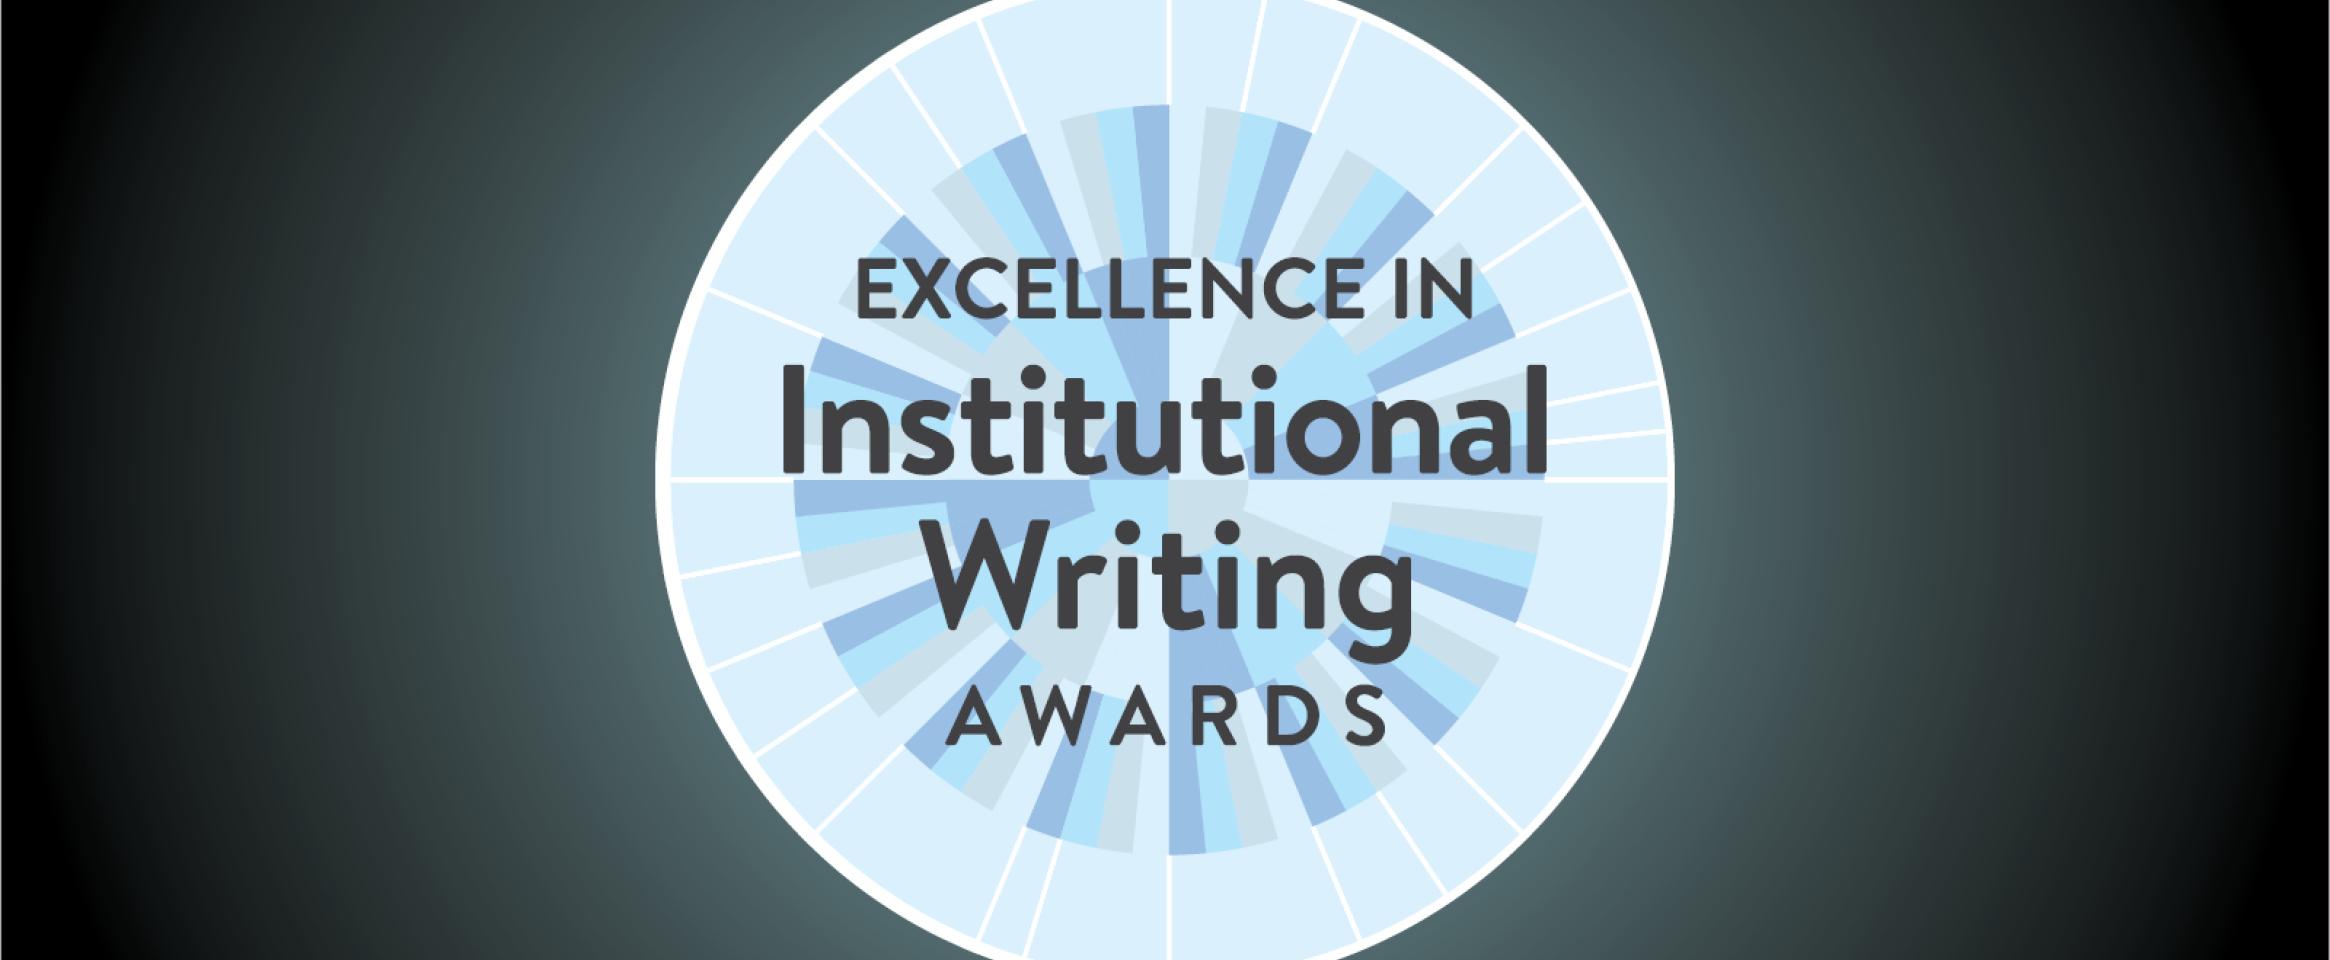 Graphic with circular logo of the N A S W Excellence in Institutional Writing Awards, which somewhat resembles a rosette or a plasmid diagram. The logo is set against a radiating gradient pattern, evoking the sense of knowledge spreading across a barren space. 